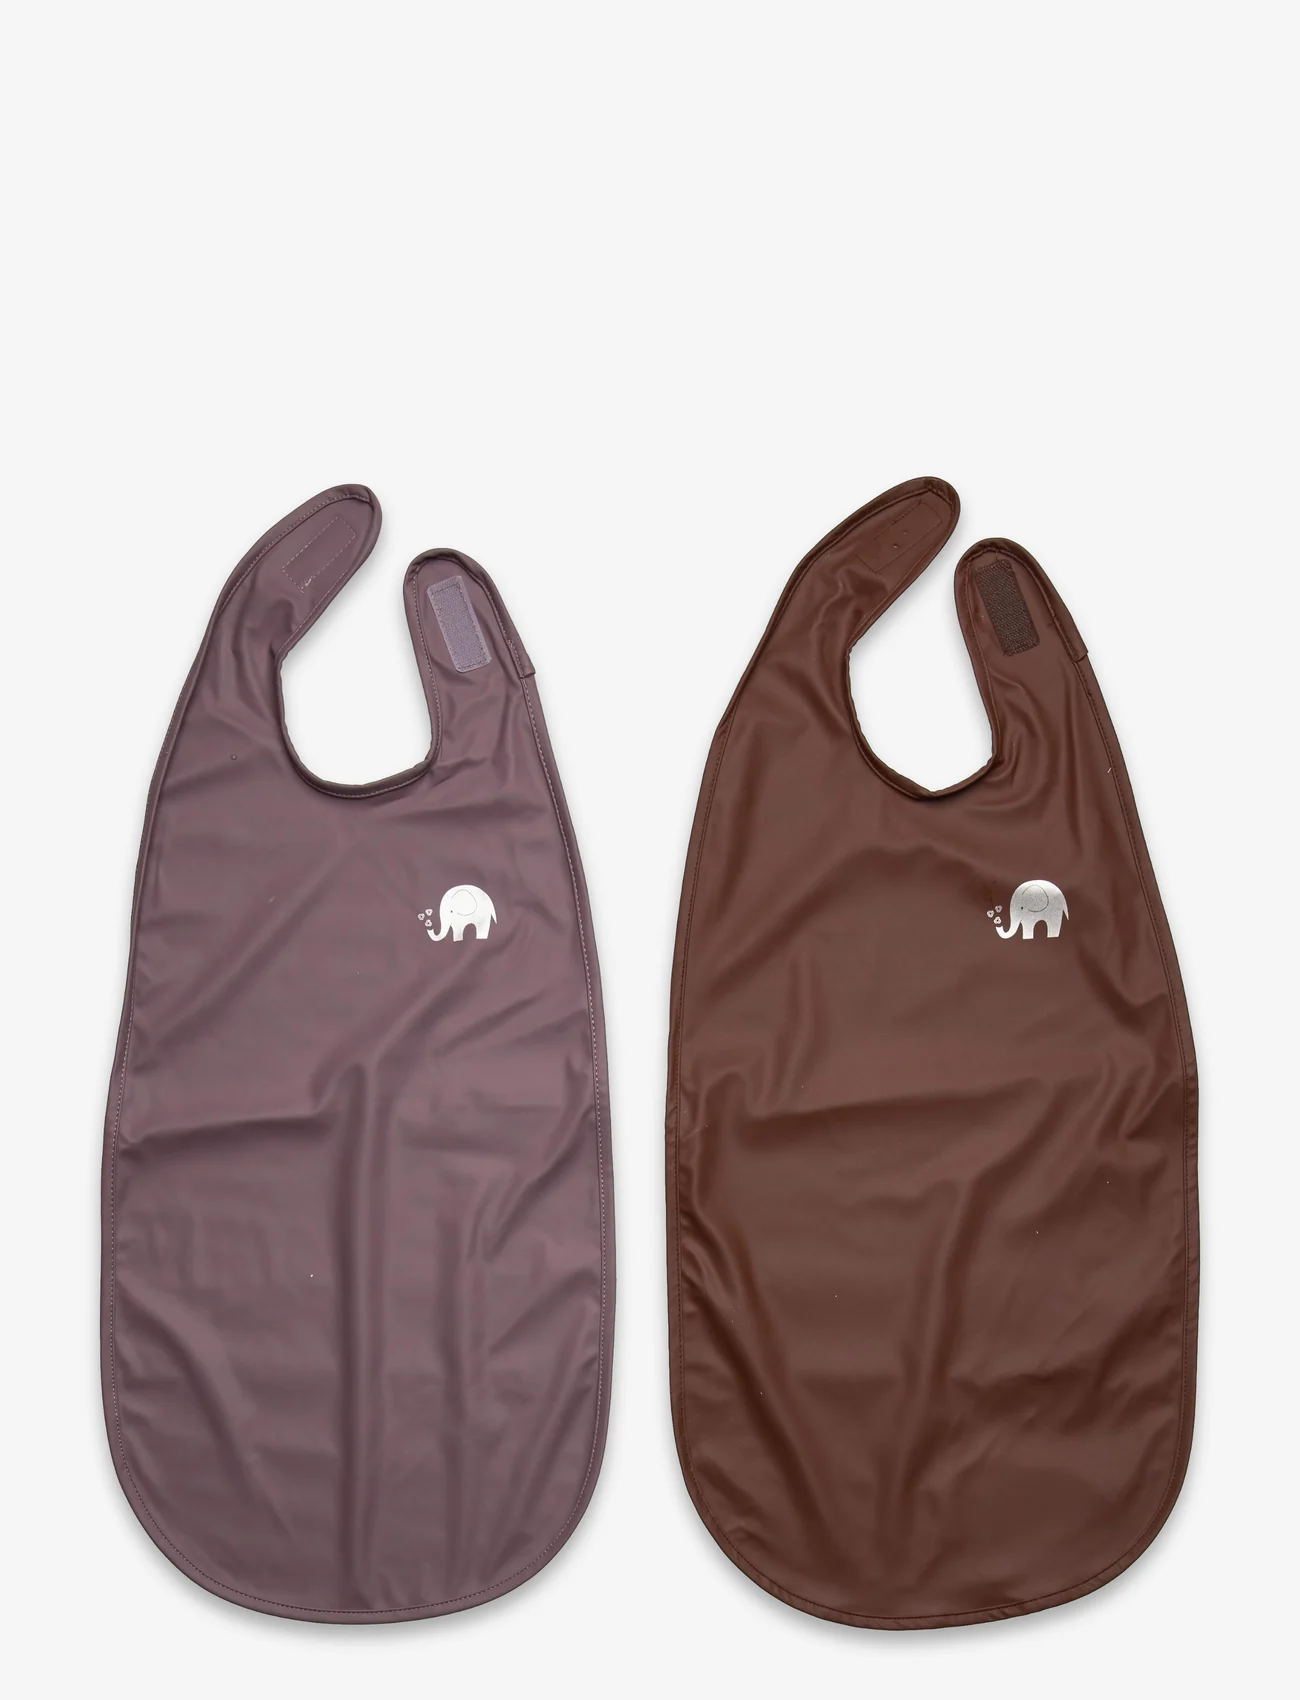 CeLaVi - Long Recycled PU Bib 2-PACK - lowest prices - moonscape - 1